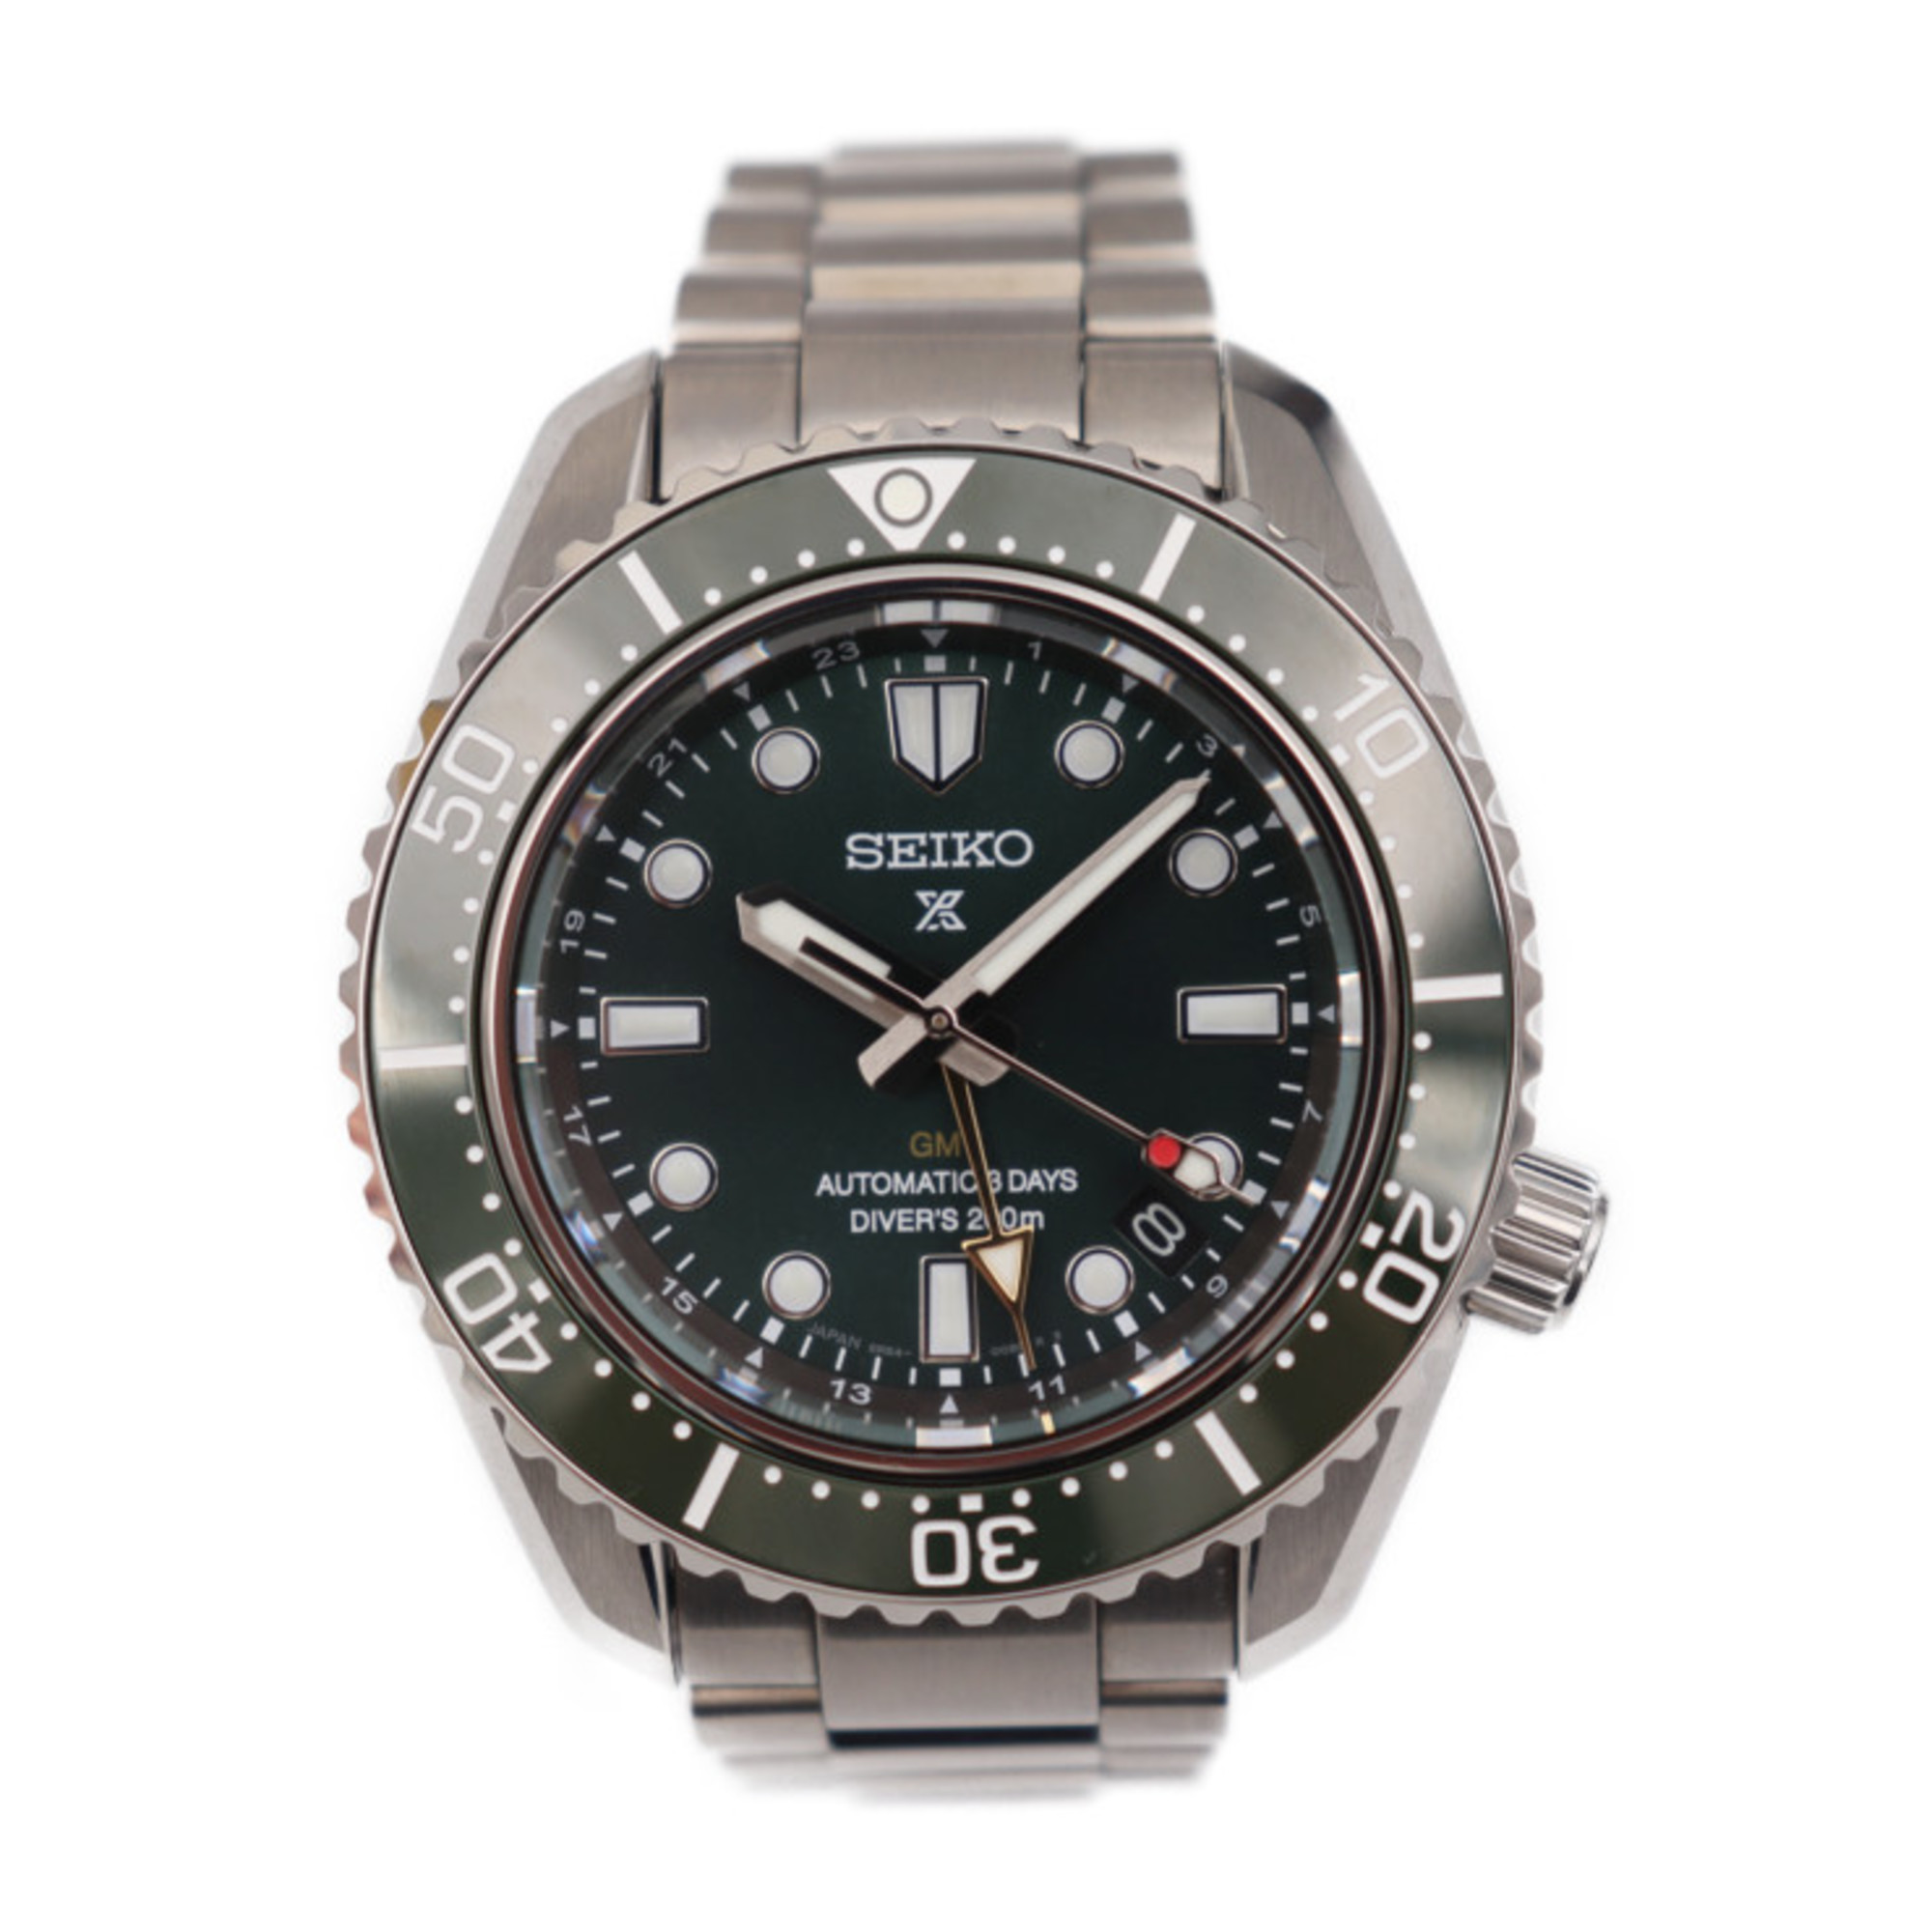 SEIKO Prospex Diver Scuba Watch SBEJ009 6R54-0DD0 Stainless Steel Silver Green Dial Mechanical 1968 Heritage GMT Automatic